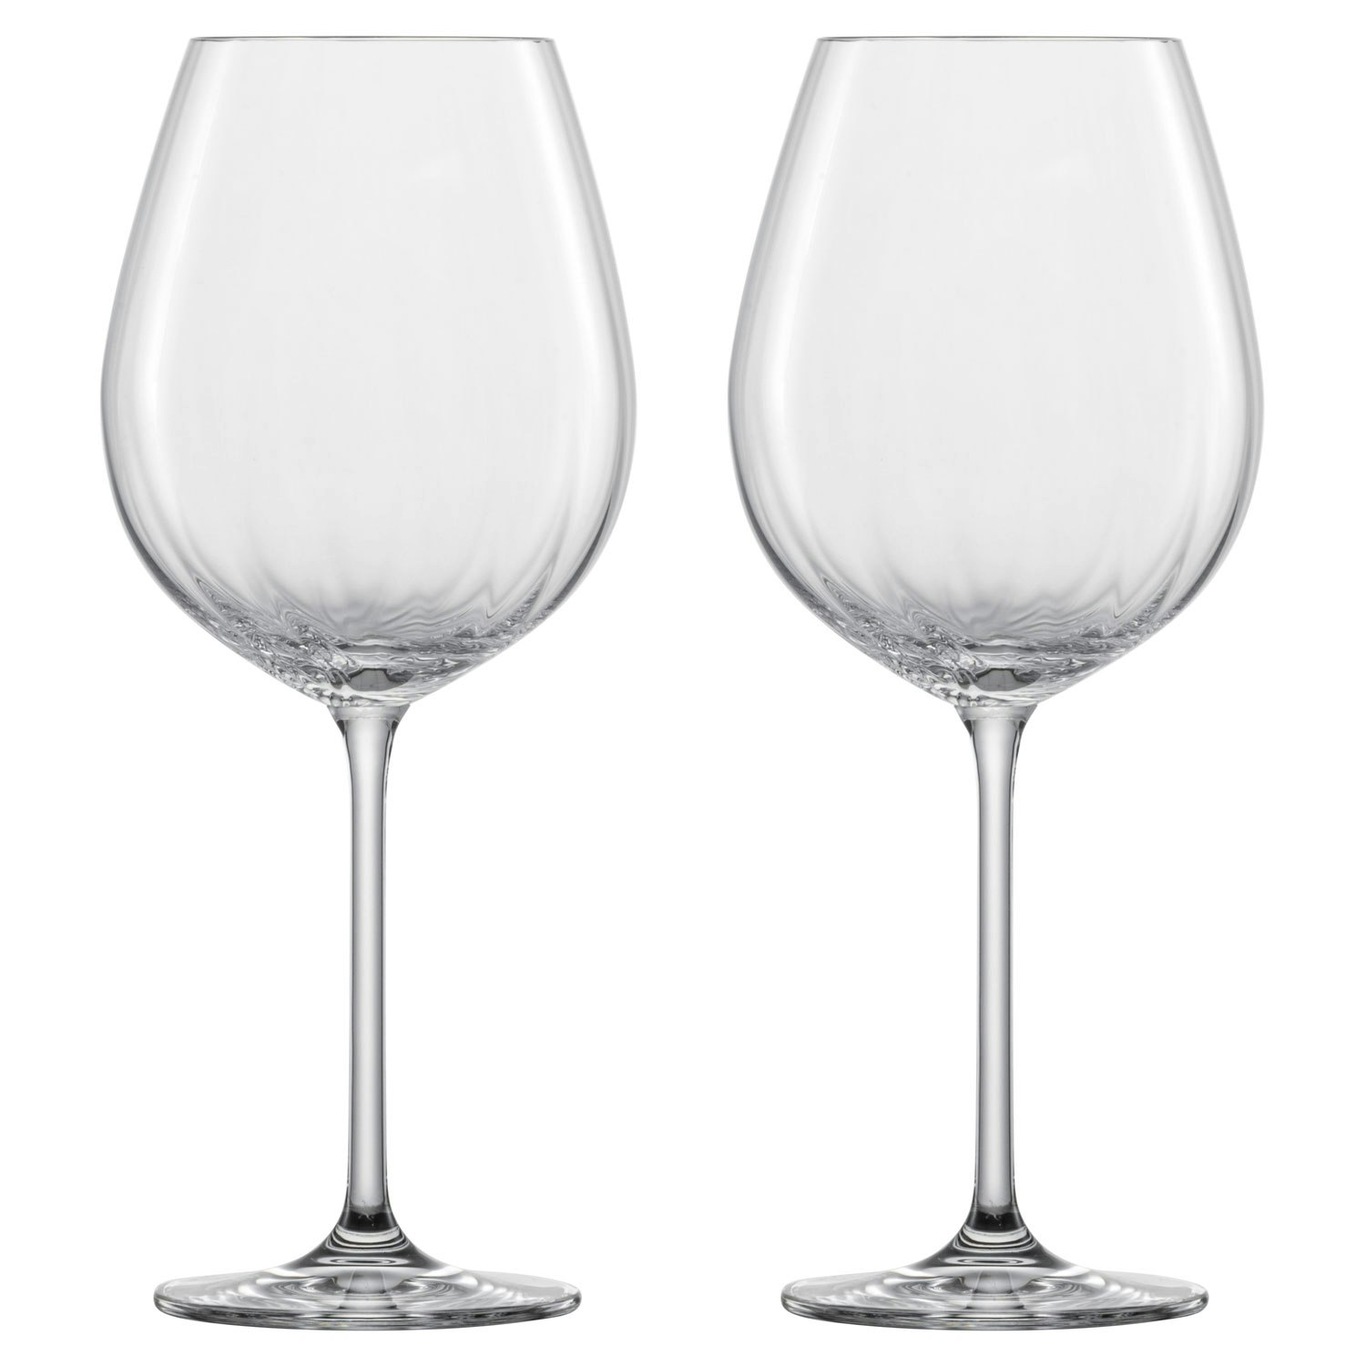 https://royaldesign.com/image/2/zwiesel-prizma-red-wine-glass-61-cl-2-pack-0?w=800&quality=80